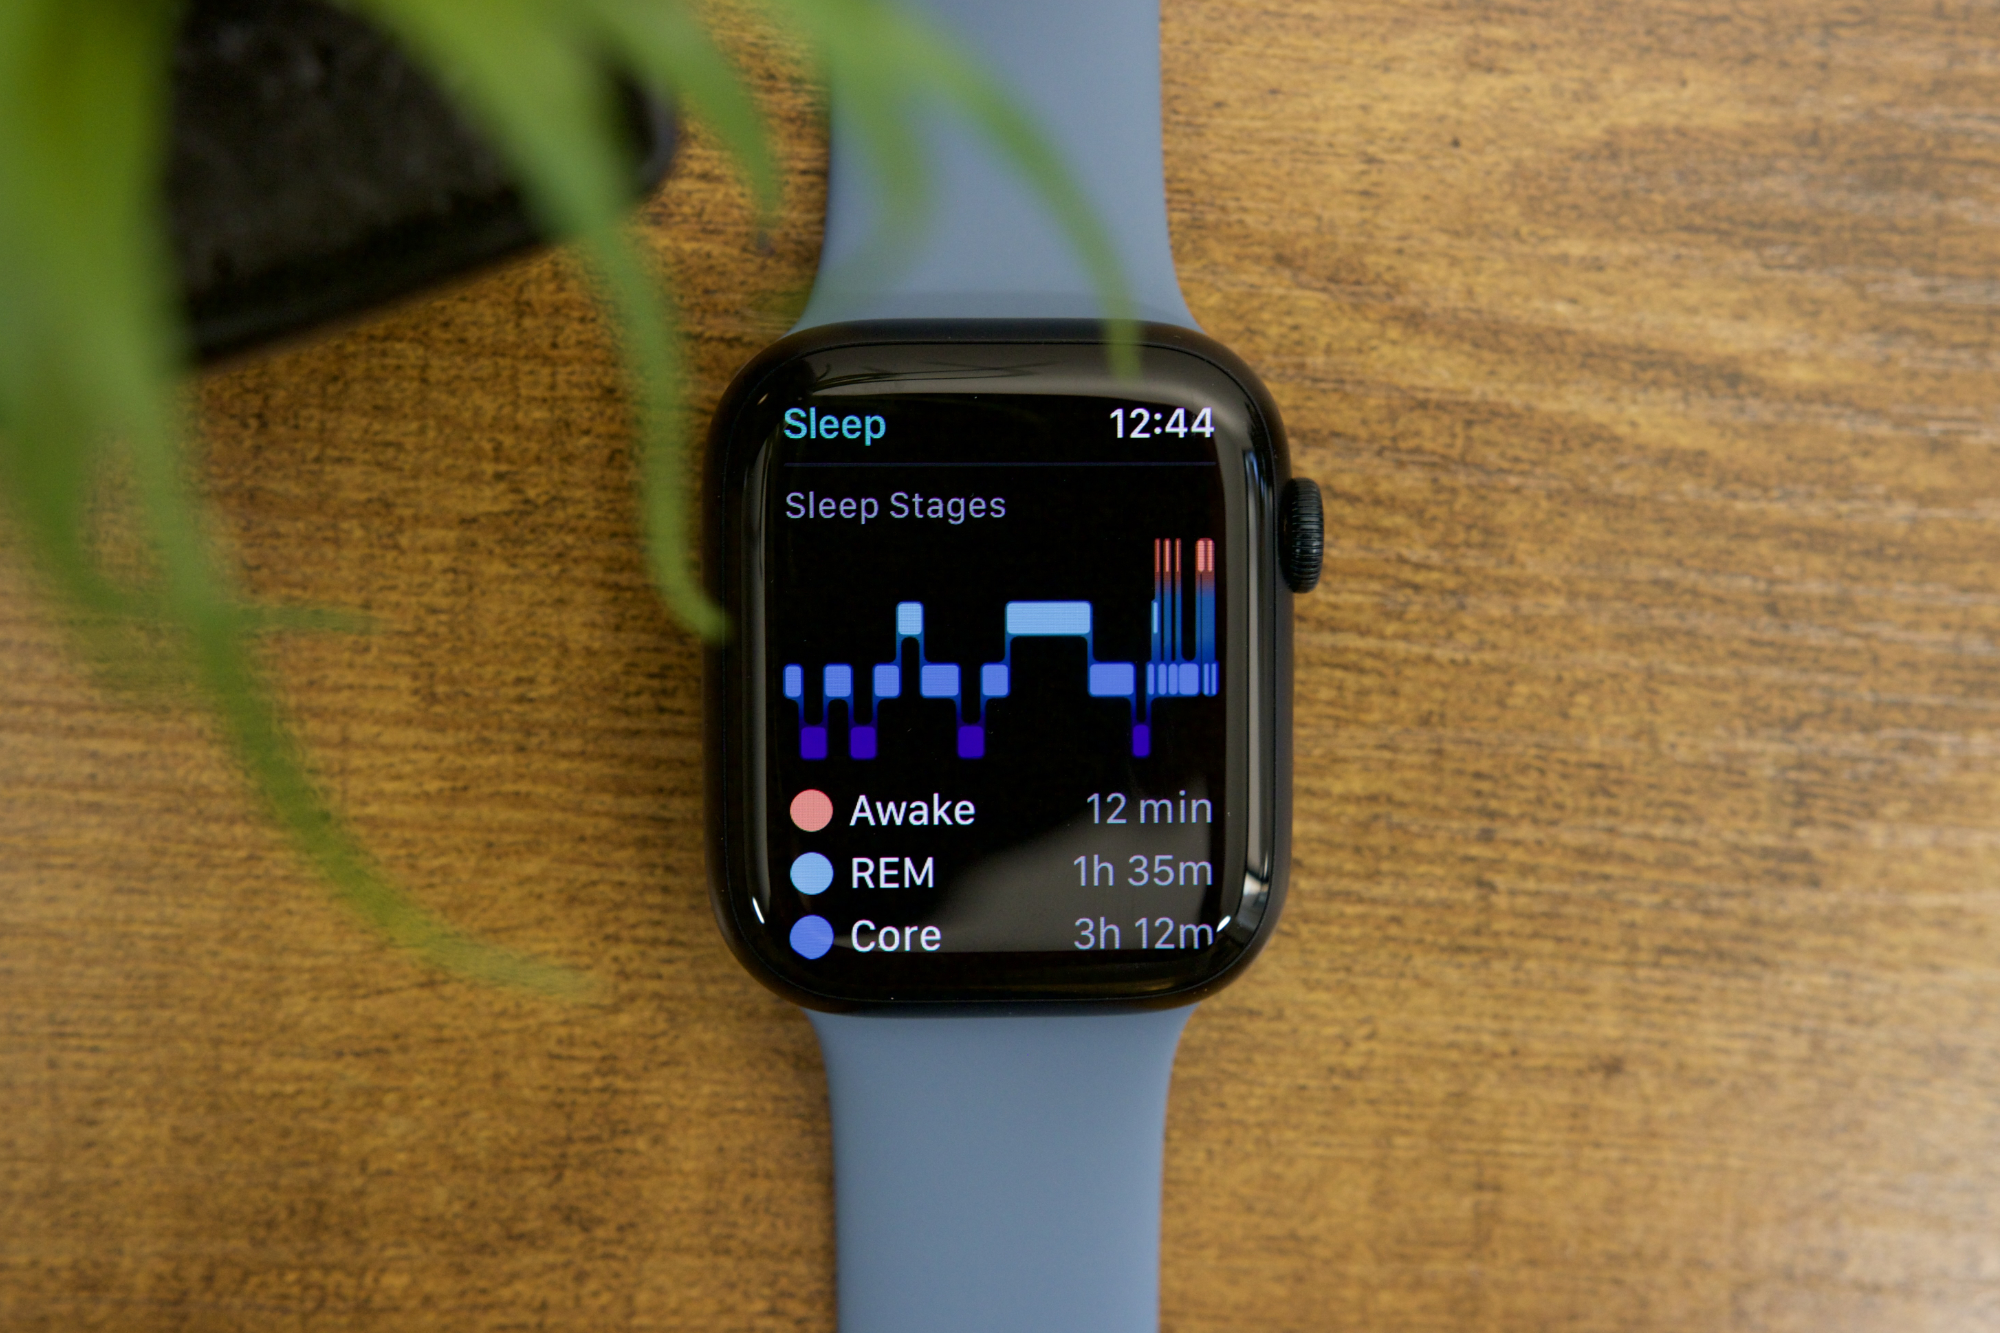 Apple Watch: New Features Reportedly Are Find My Watch, Apple TV